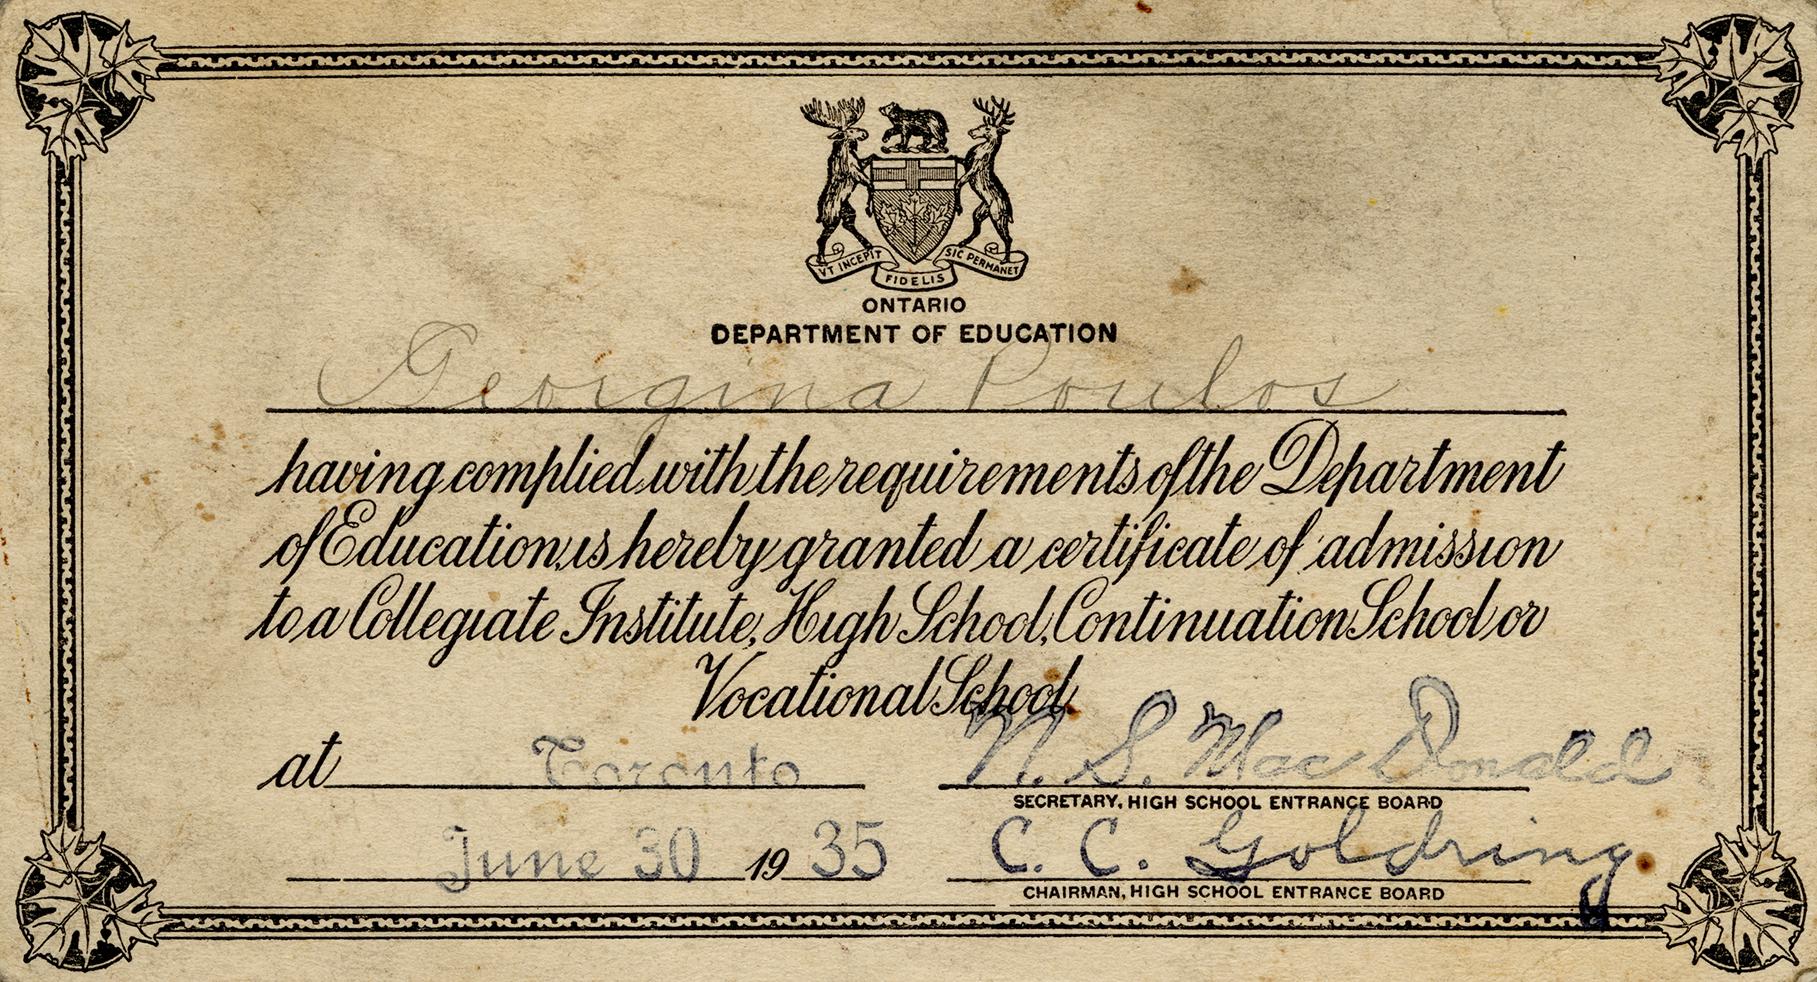 Ontario Department of Education high school admission certificate